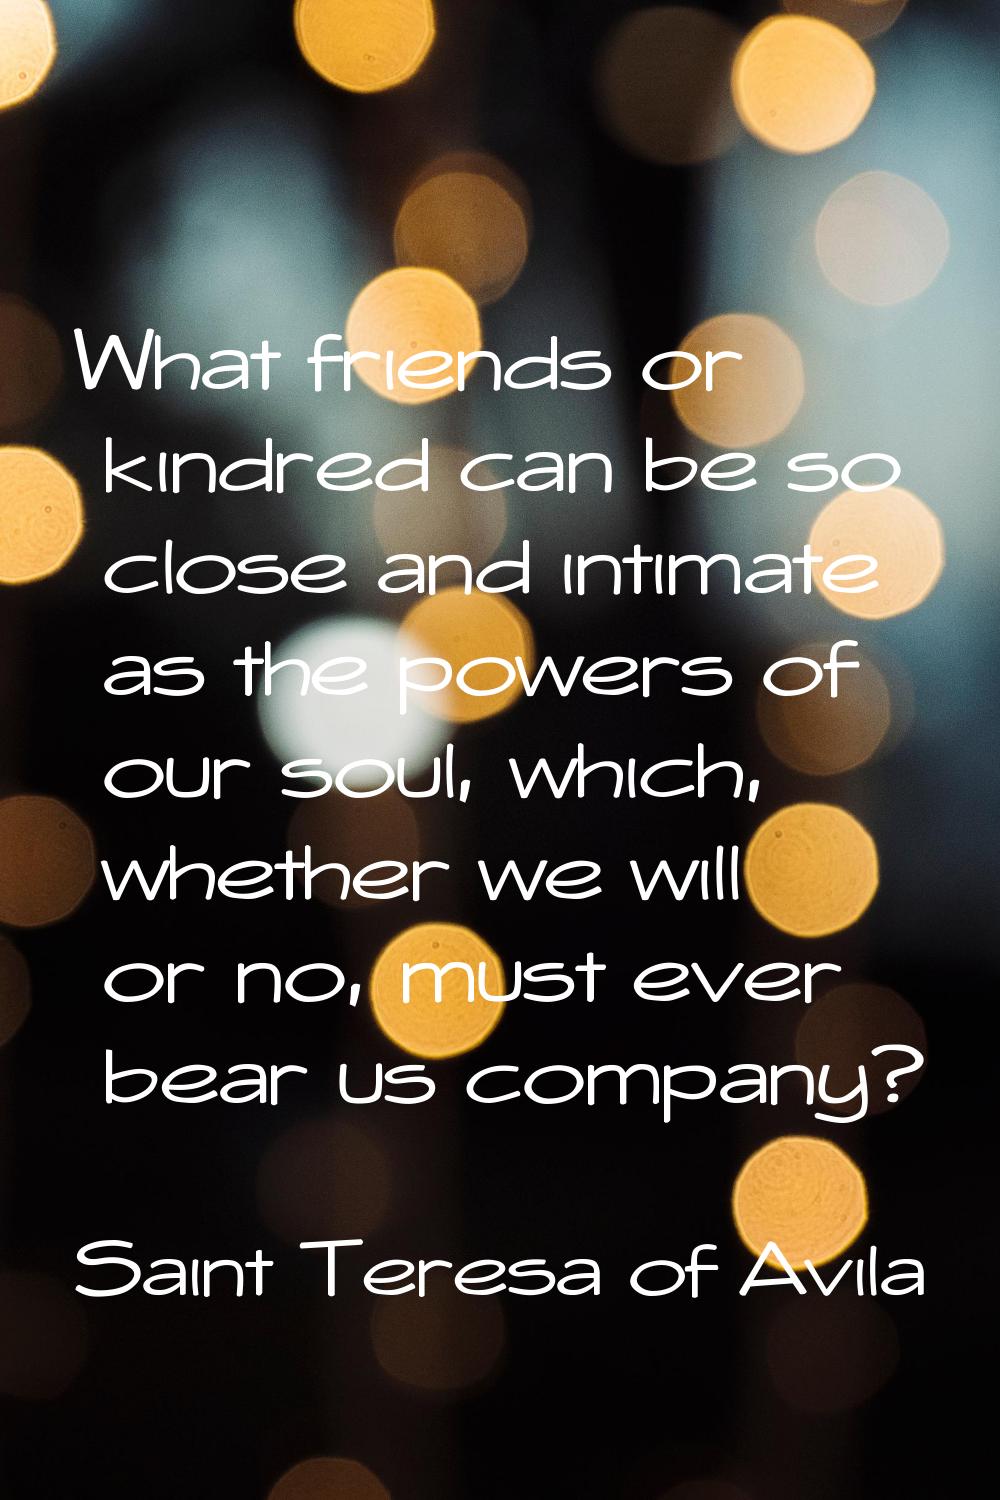 What friends or kindred can be so close and intimate as the powers of our soul, which, whether we w